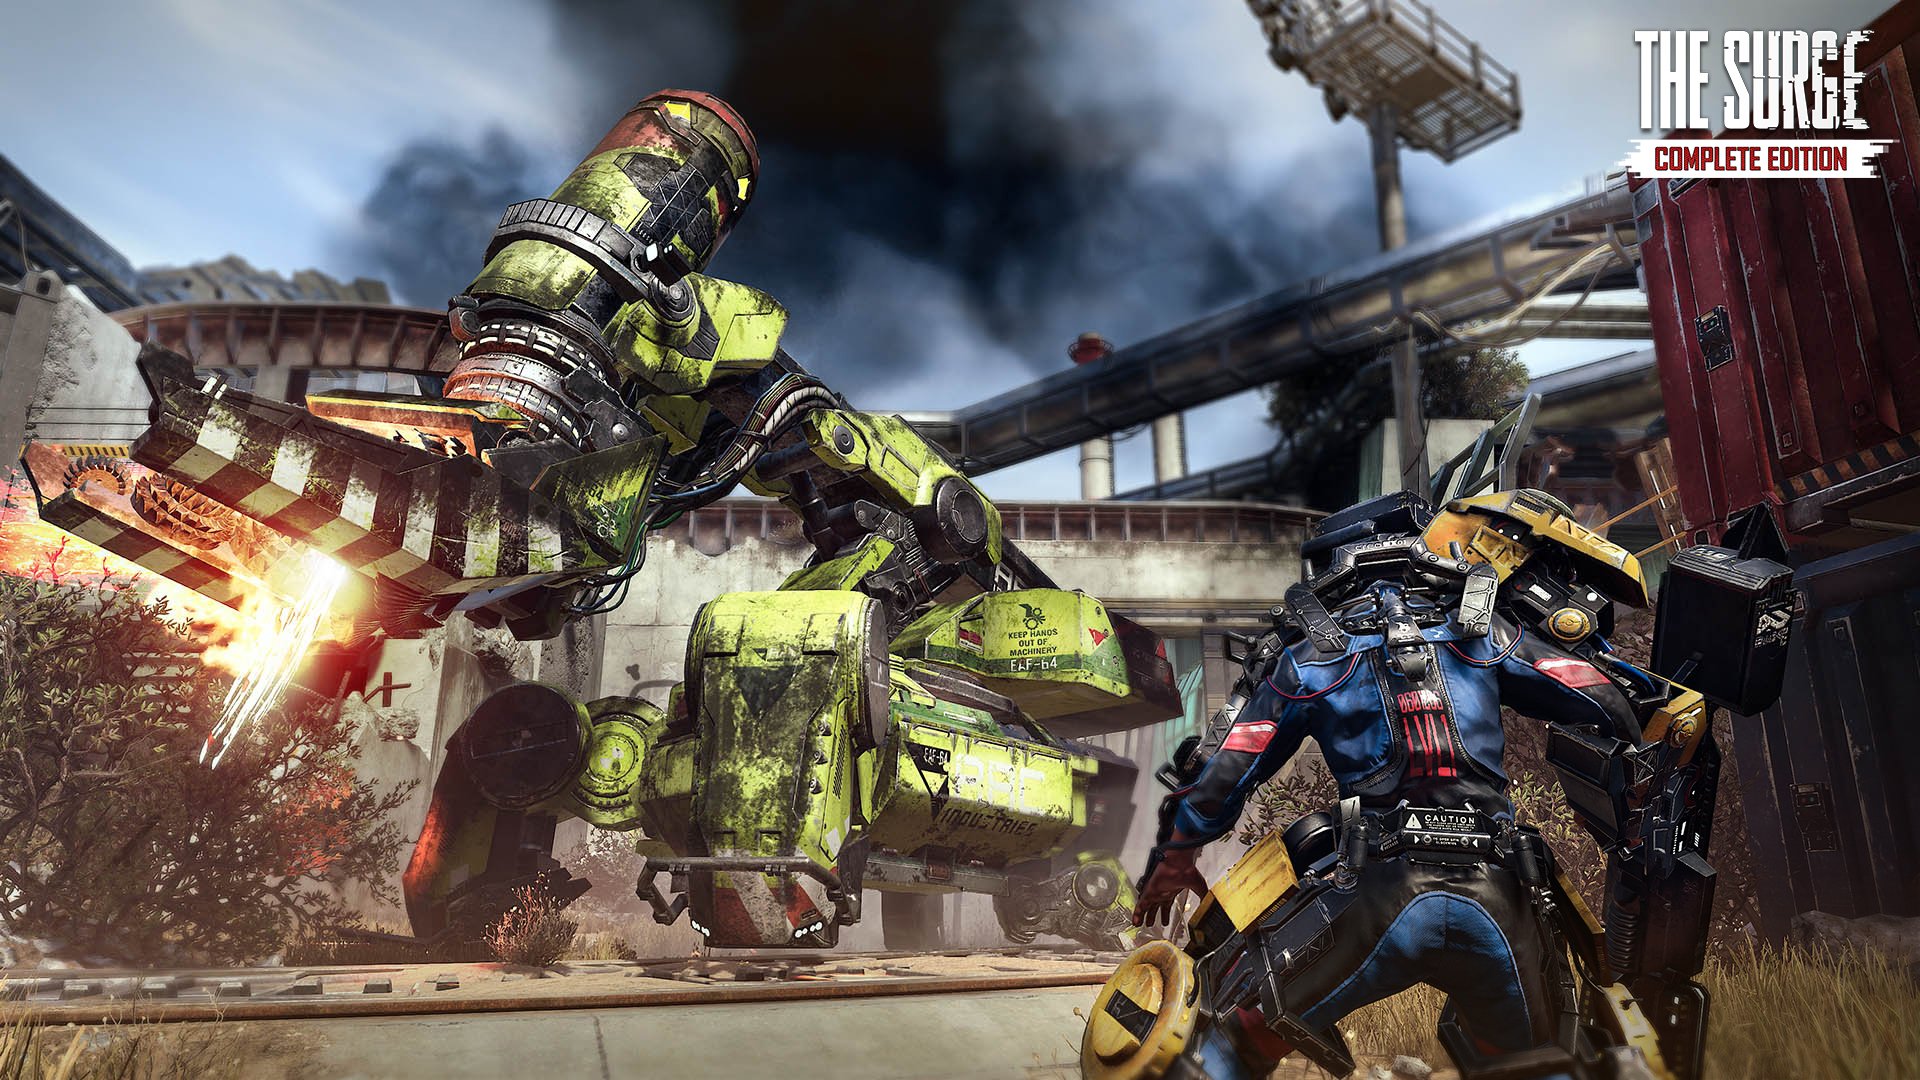 The Surge Complete Edition Screenshot